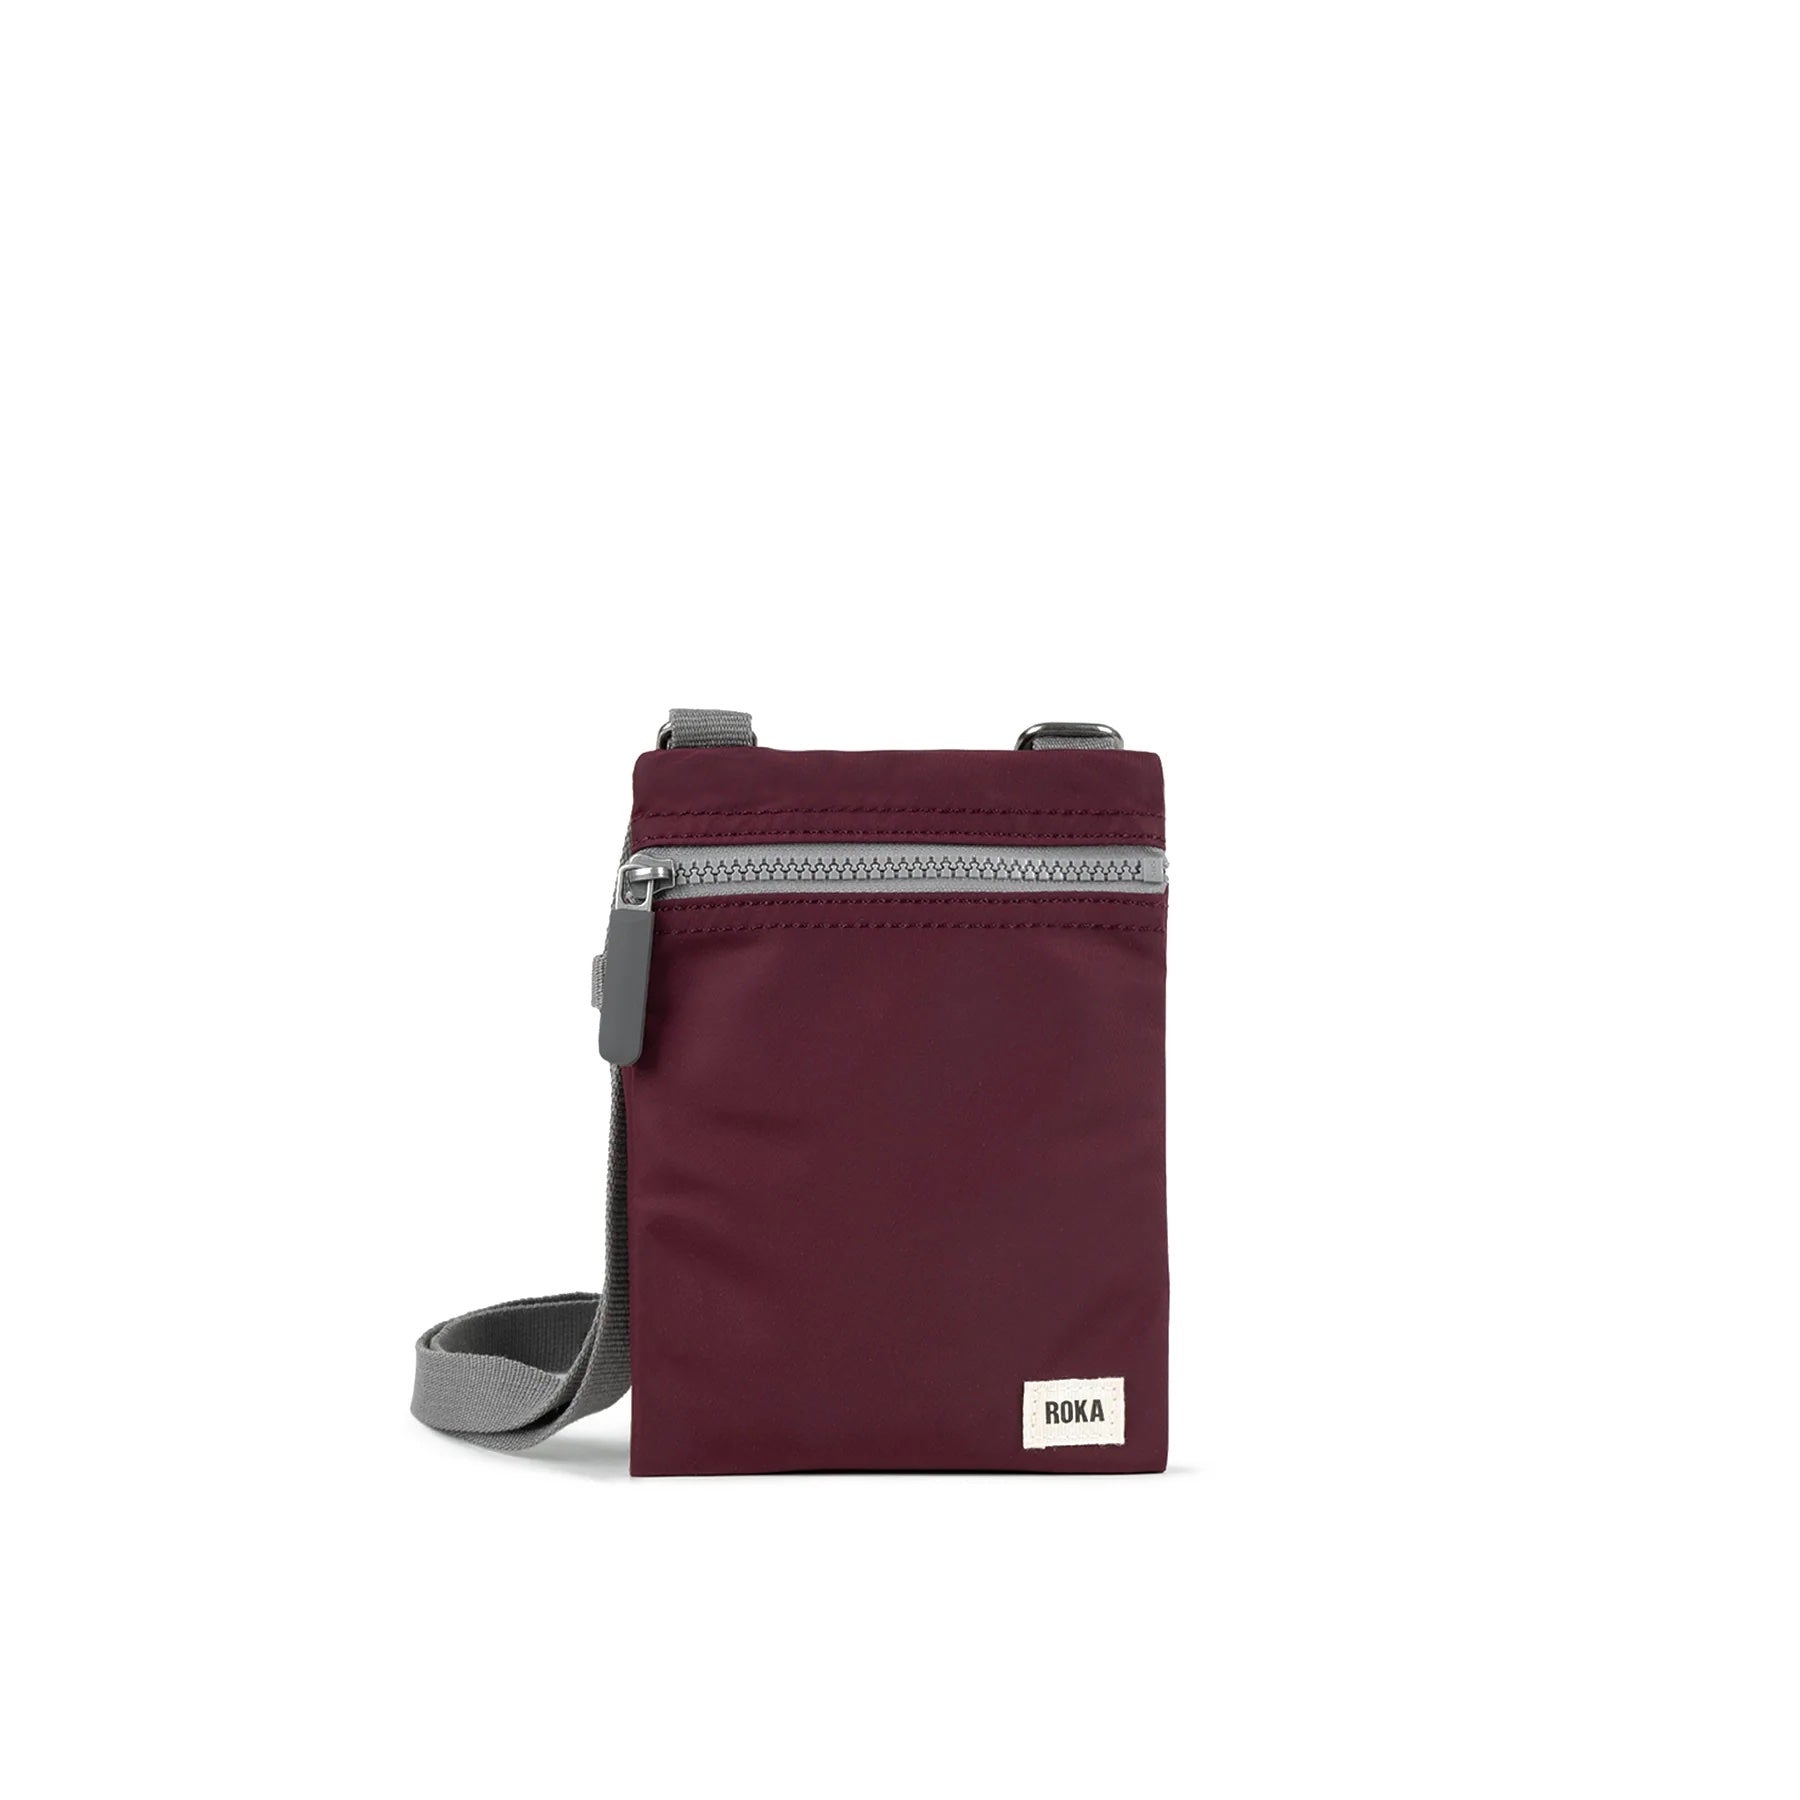 A photo of the front of a small rectangular dark plum coloured pocket bag. It has a grey zip horizontally at the top, grey straps, and a small ROKA logo in the bottom right corner.